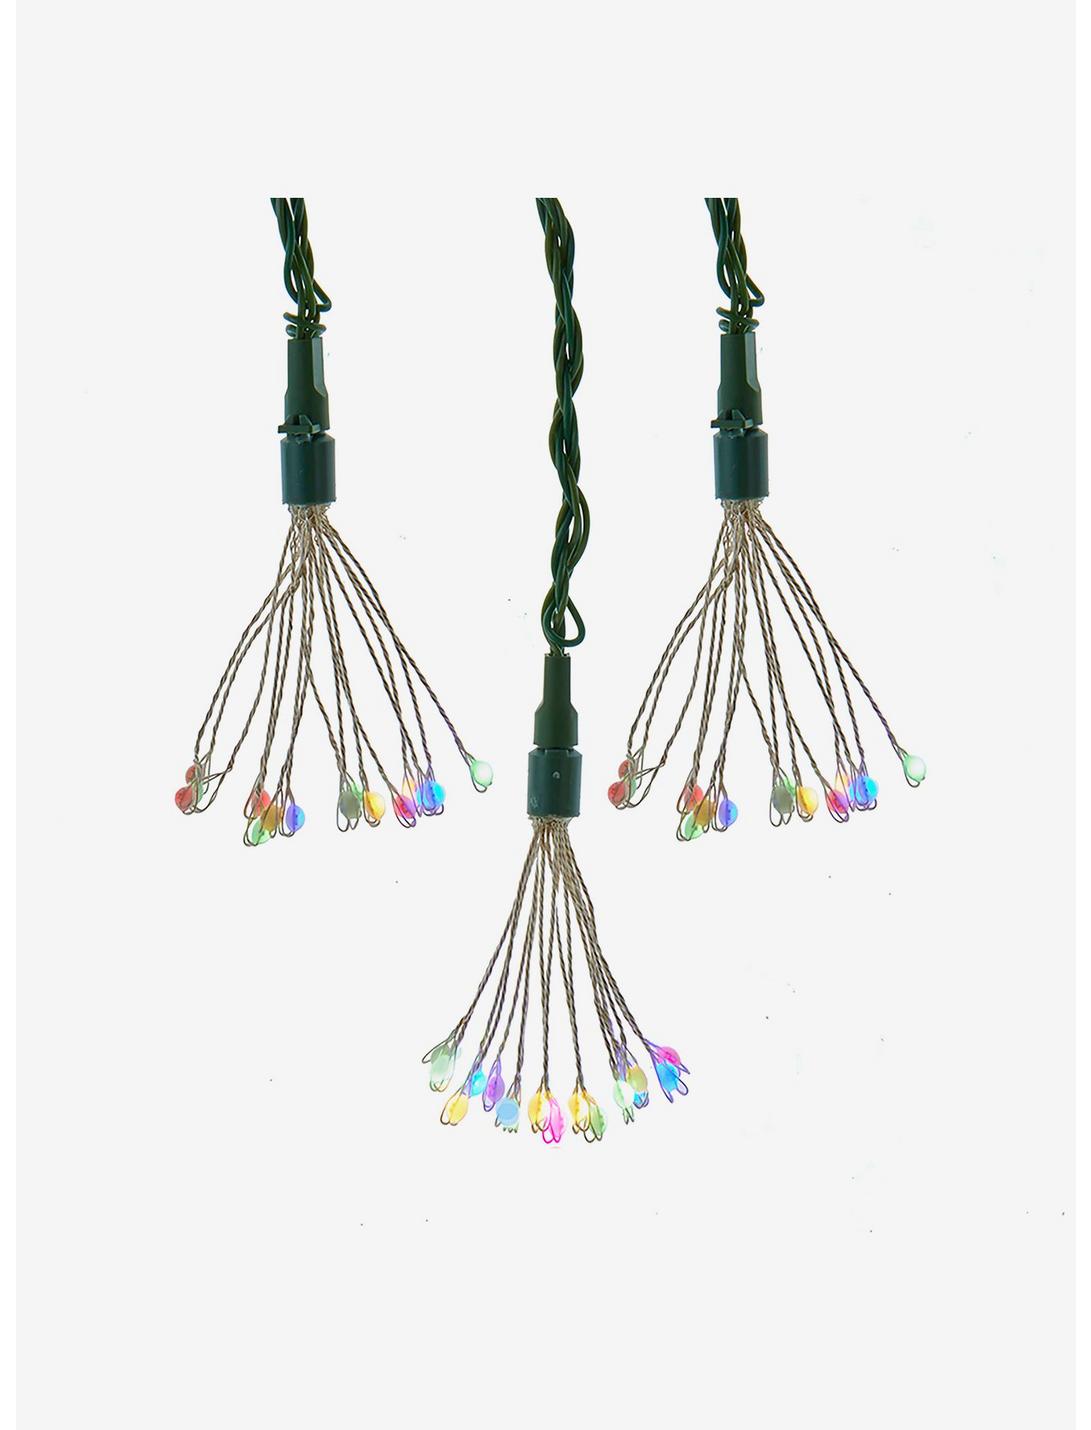 Light Cluster Lights And Multicolor Twinkle Led Lights With Green Wire, , hi-res